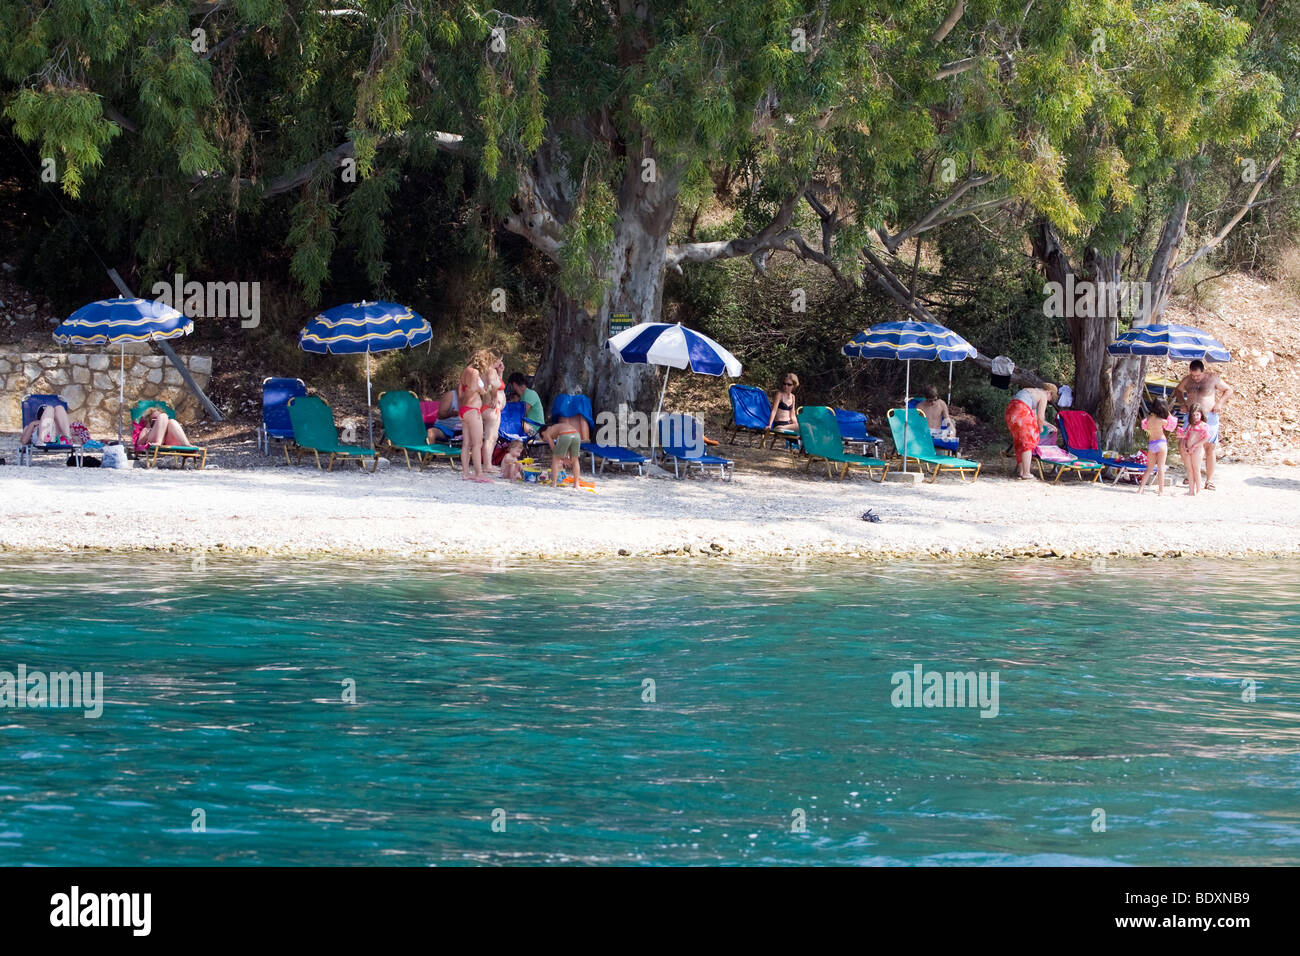 Day at the Beach. Families and Umbrellas. Corfu, Greece. NO Model Release. Stock Photo